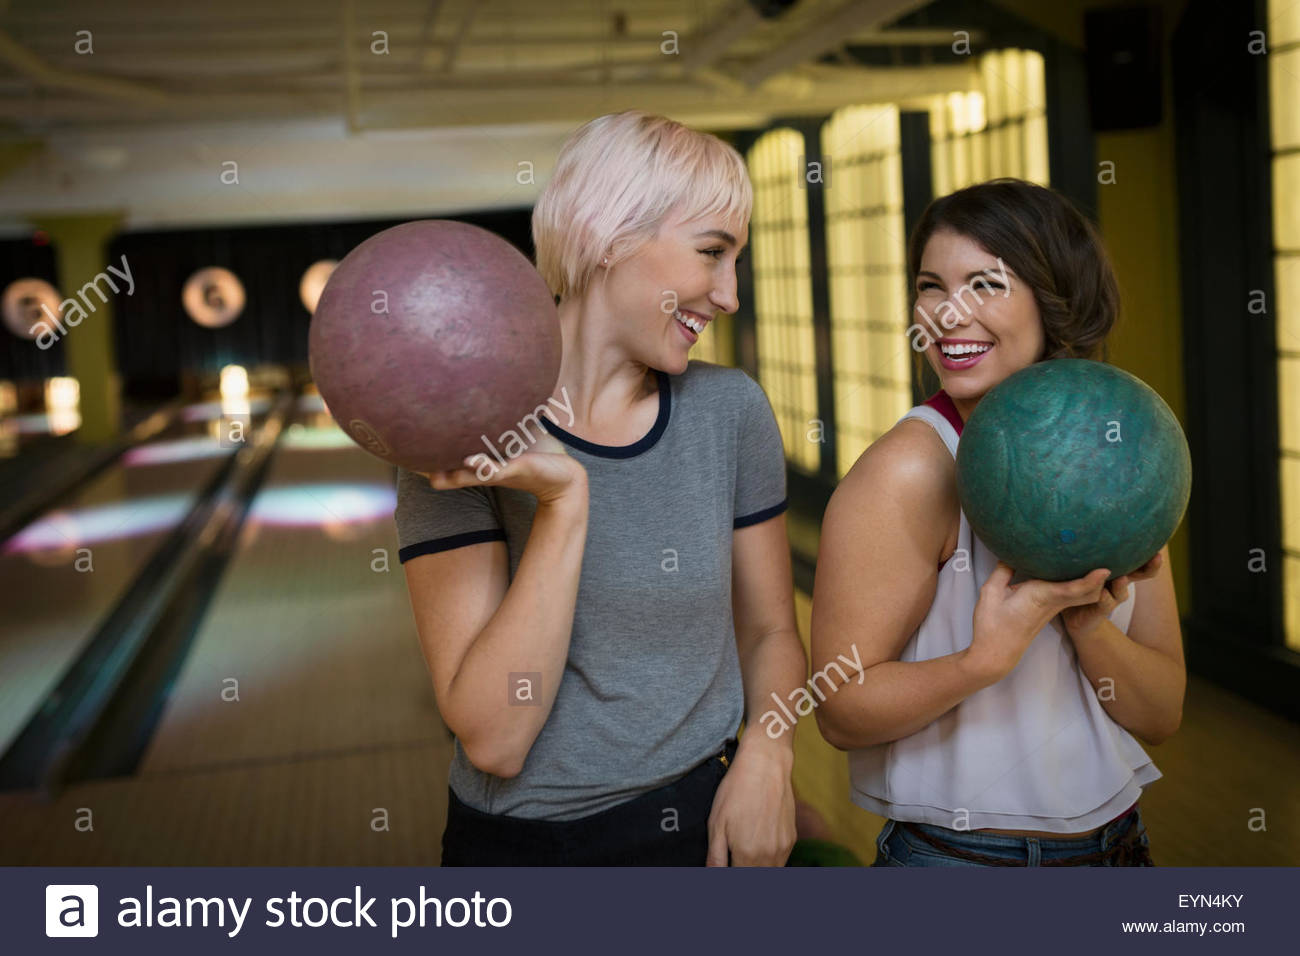 Smiling young women holding bowling balls Stock Photo